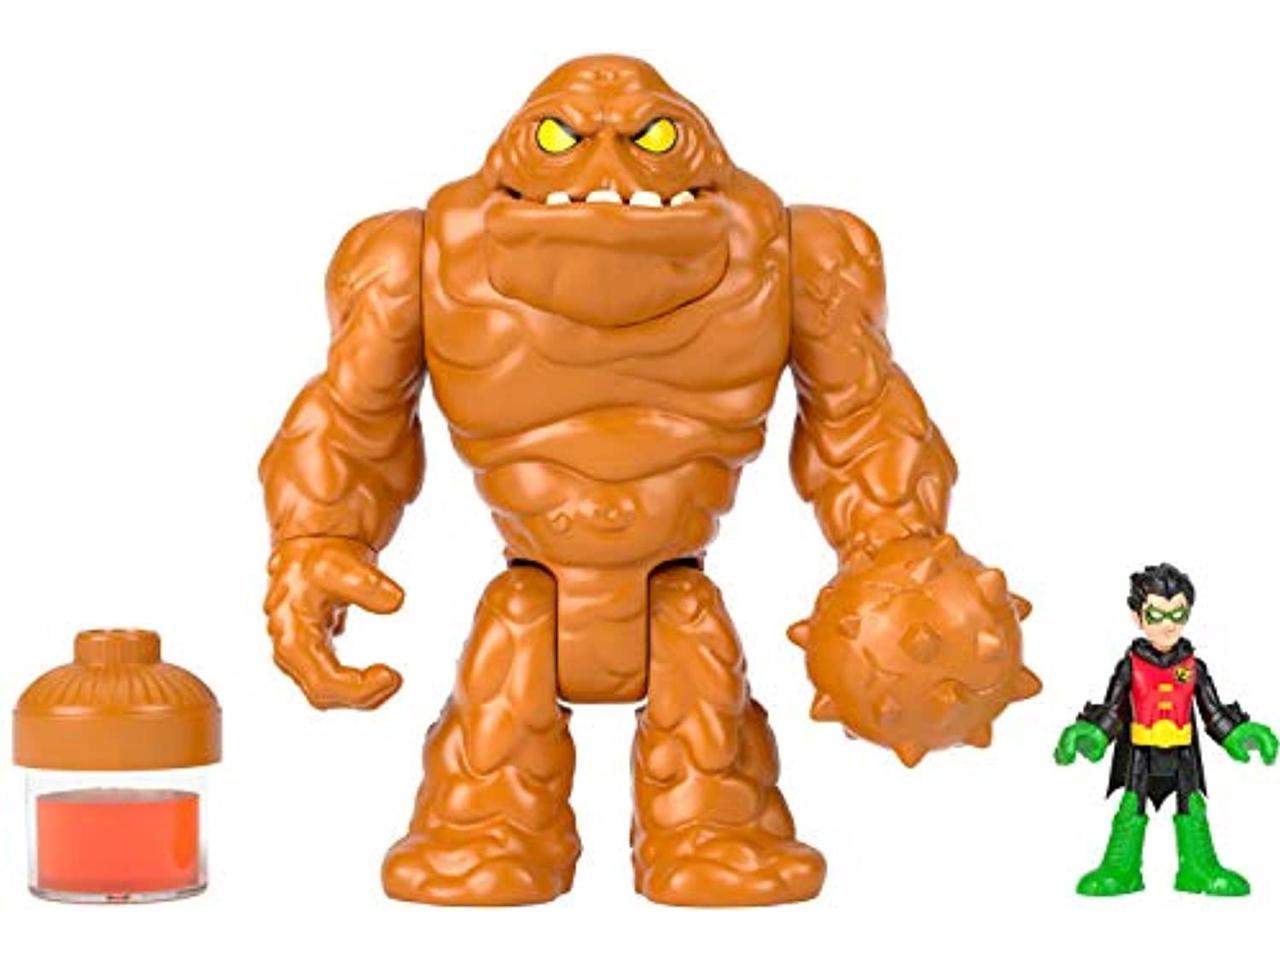 GBL27 for sale online Imaginext DC Super Friends Oozing Clayface and Robin 